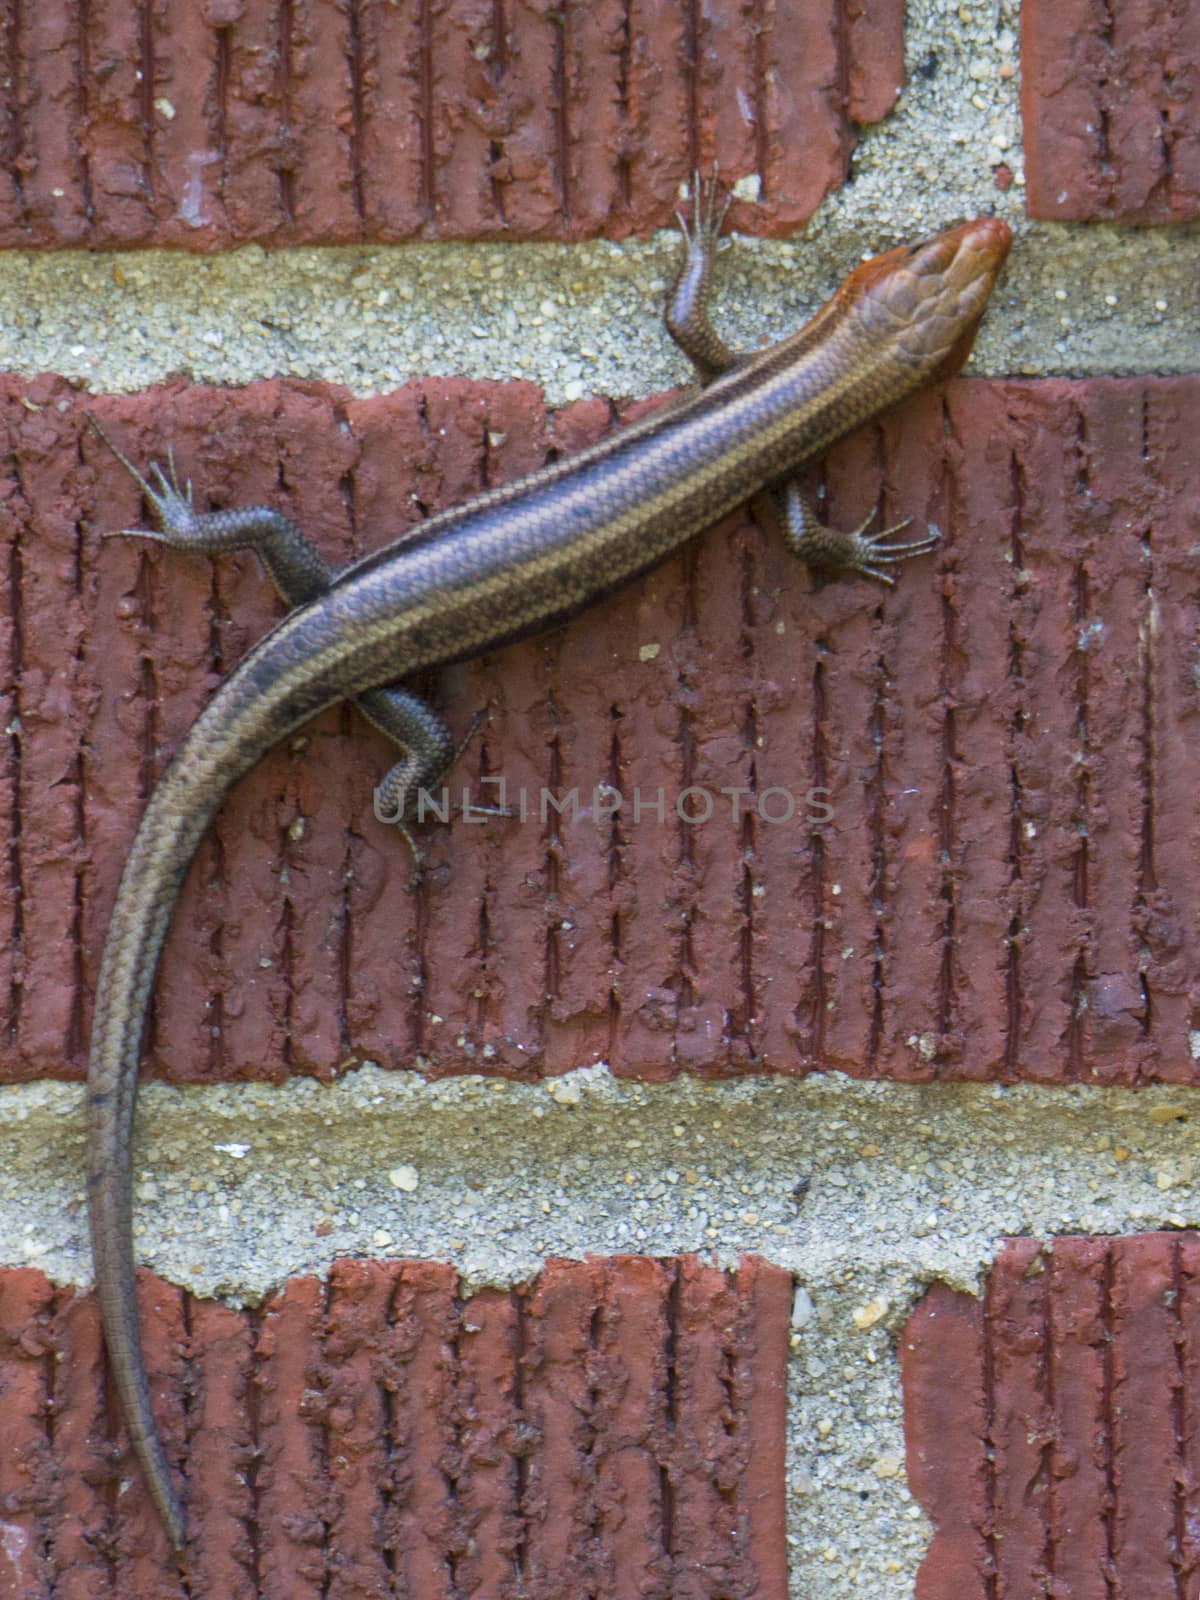 Brown lizard clings to red brick wall.